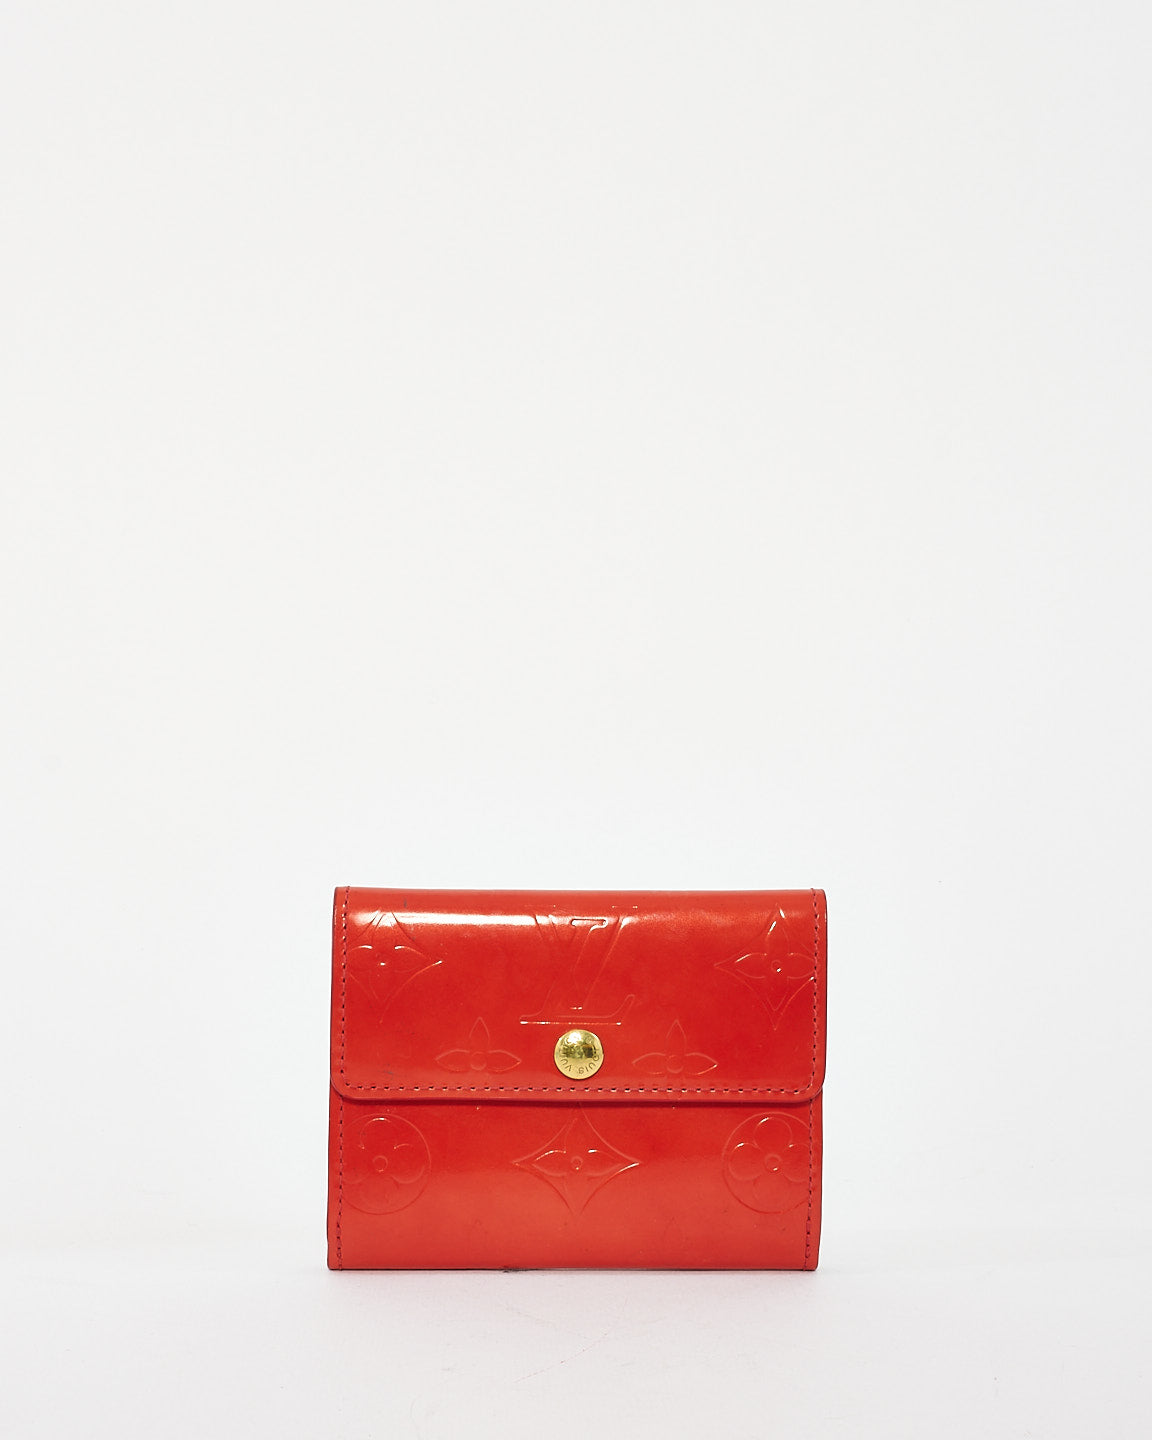 Keep My Heart Monogram Vernis - Wallets and Small Leather Goods